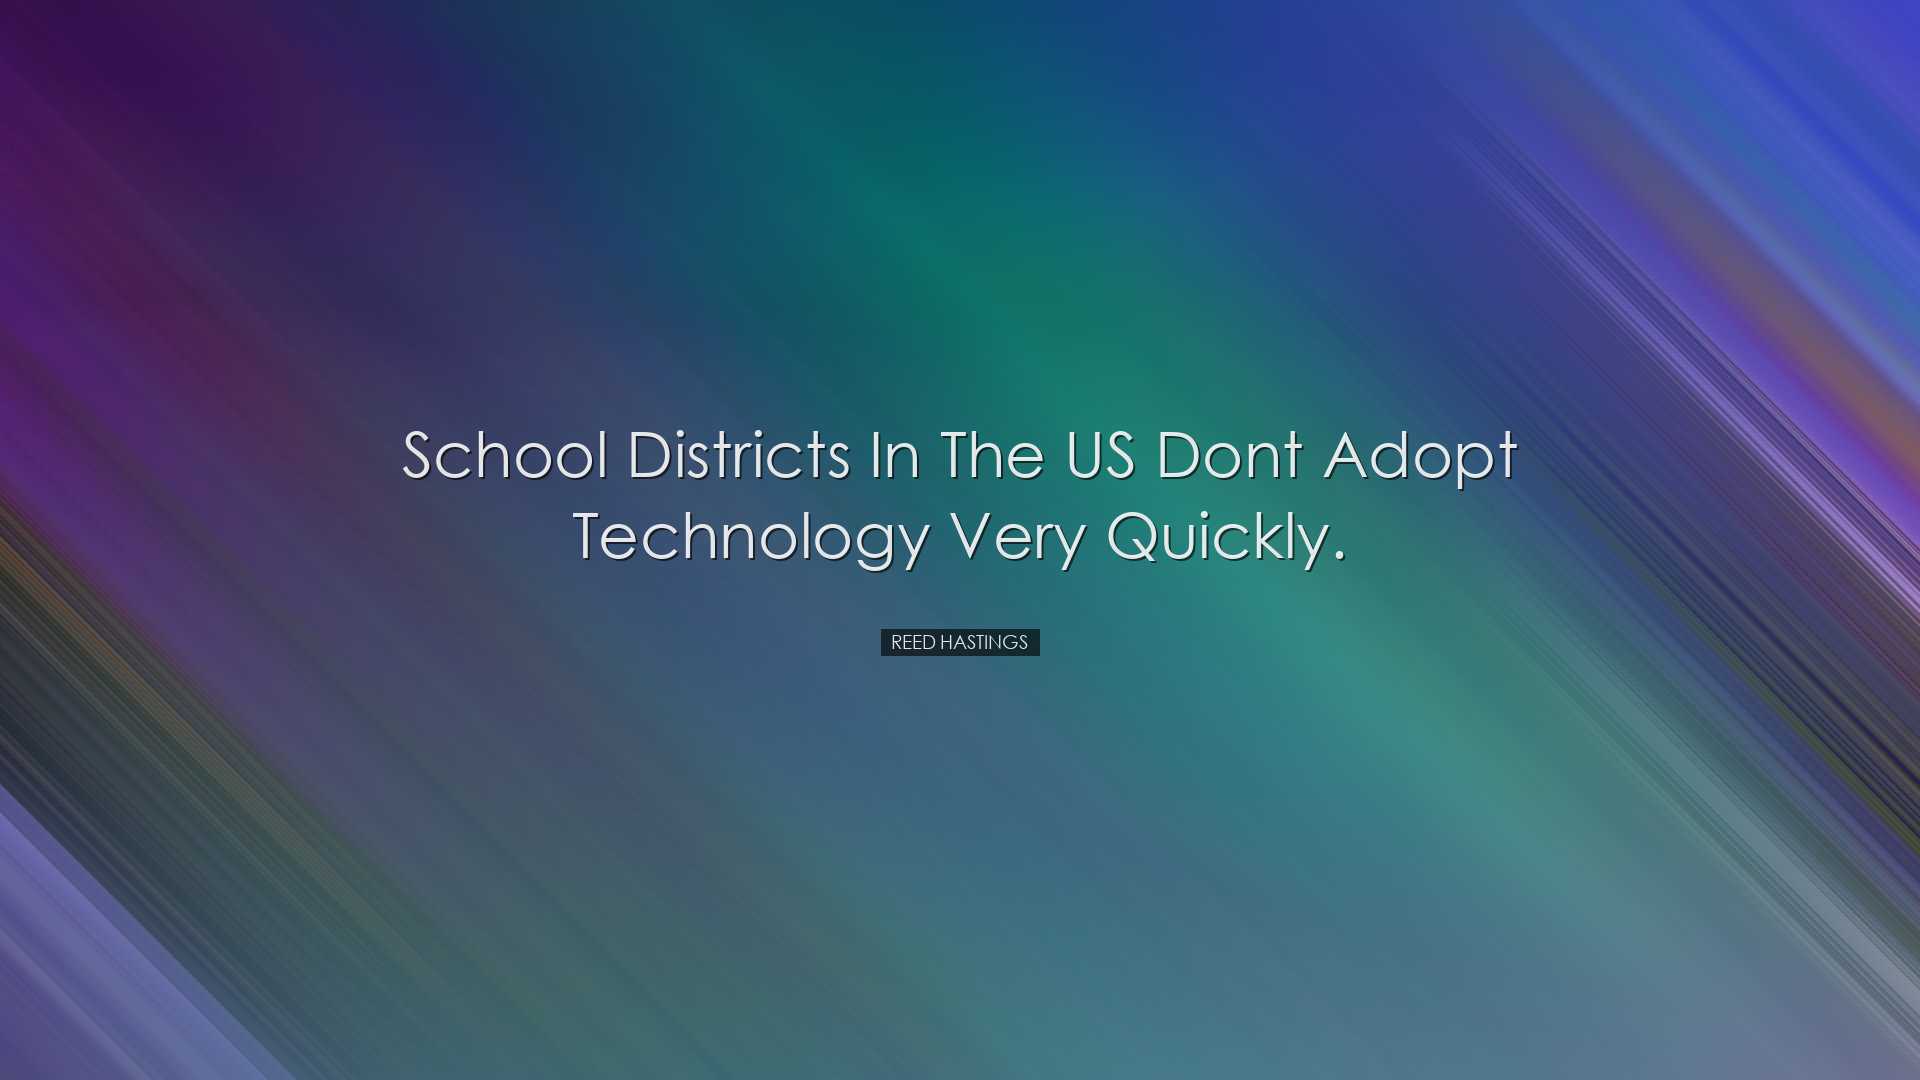 School districts in the US dont adopt technology very quickly. - R